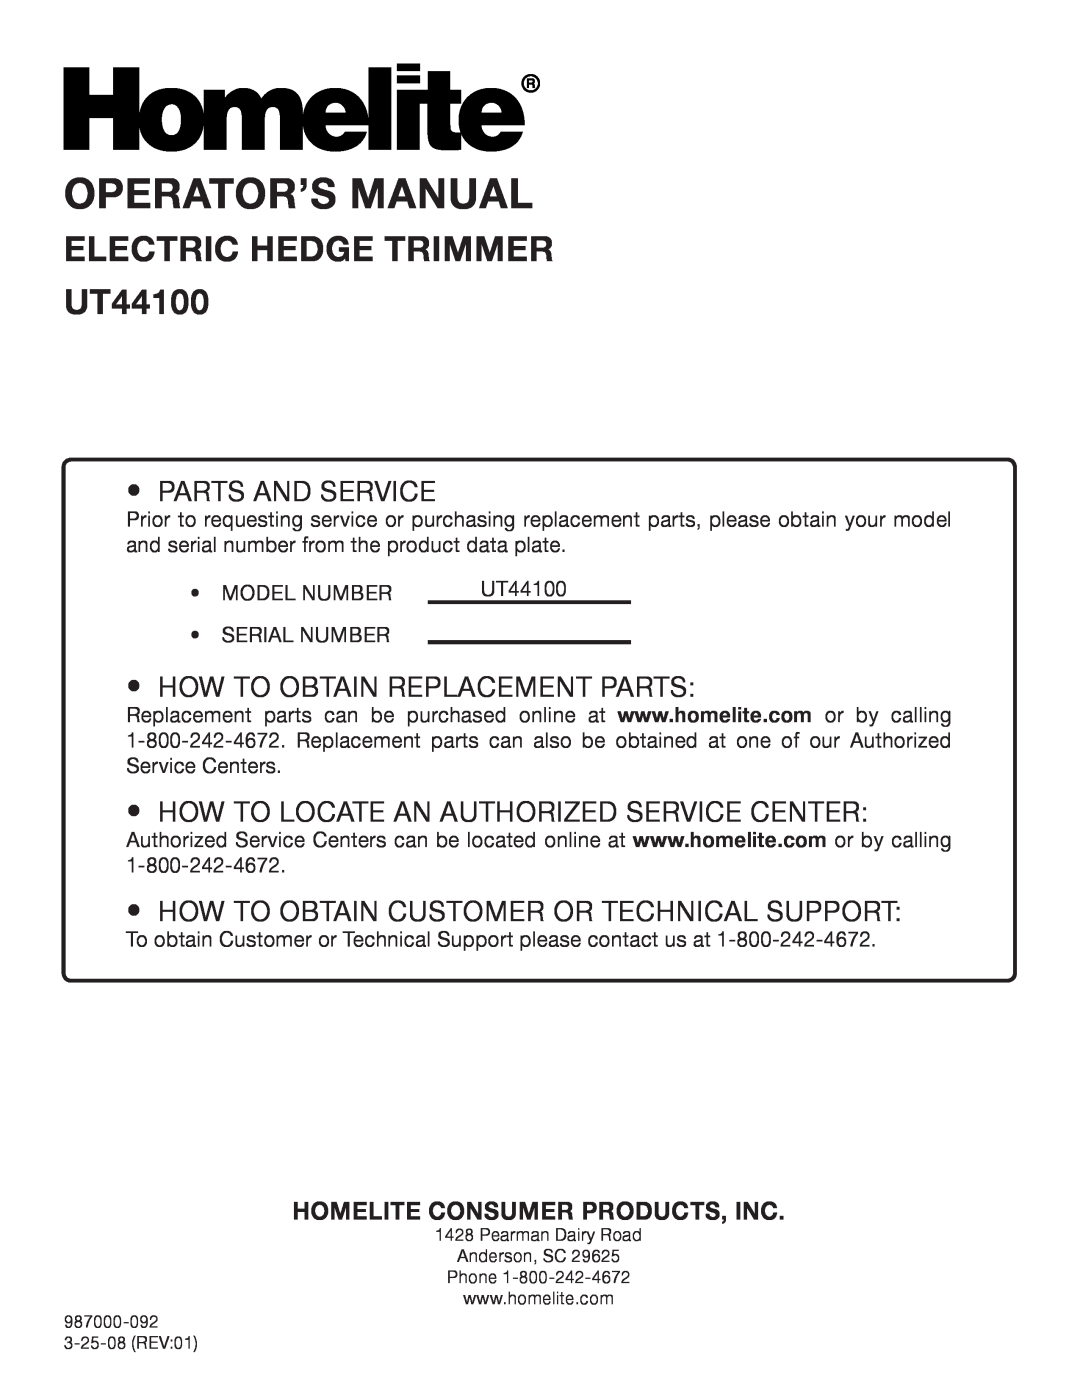 Homelite UT 44100 Operator’S Manual, Electric Hedge Trimmer UT44100, Parts and Service, How to obtain Replacement Parts 